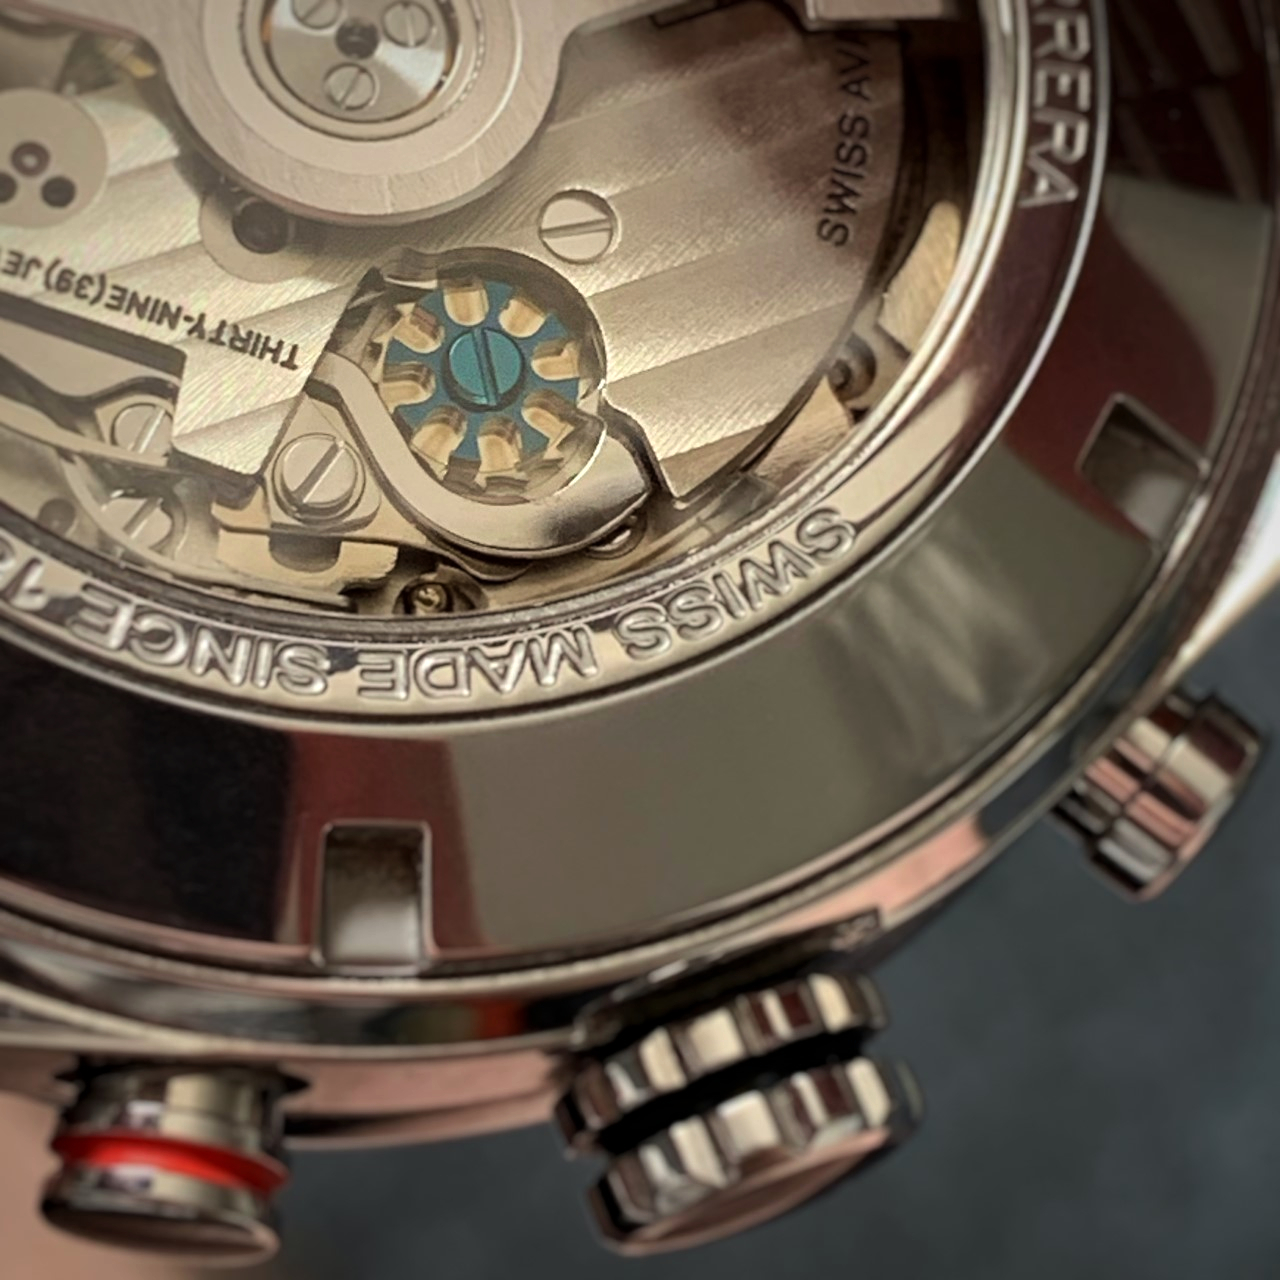 Carrera caseback showing multiple watch finishing techniques and the chronograph complication